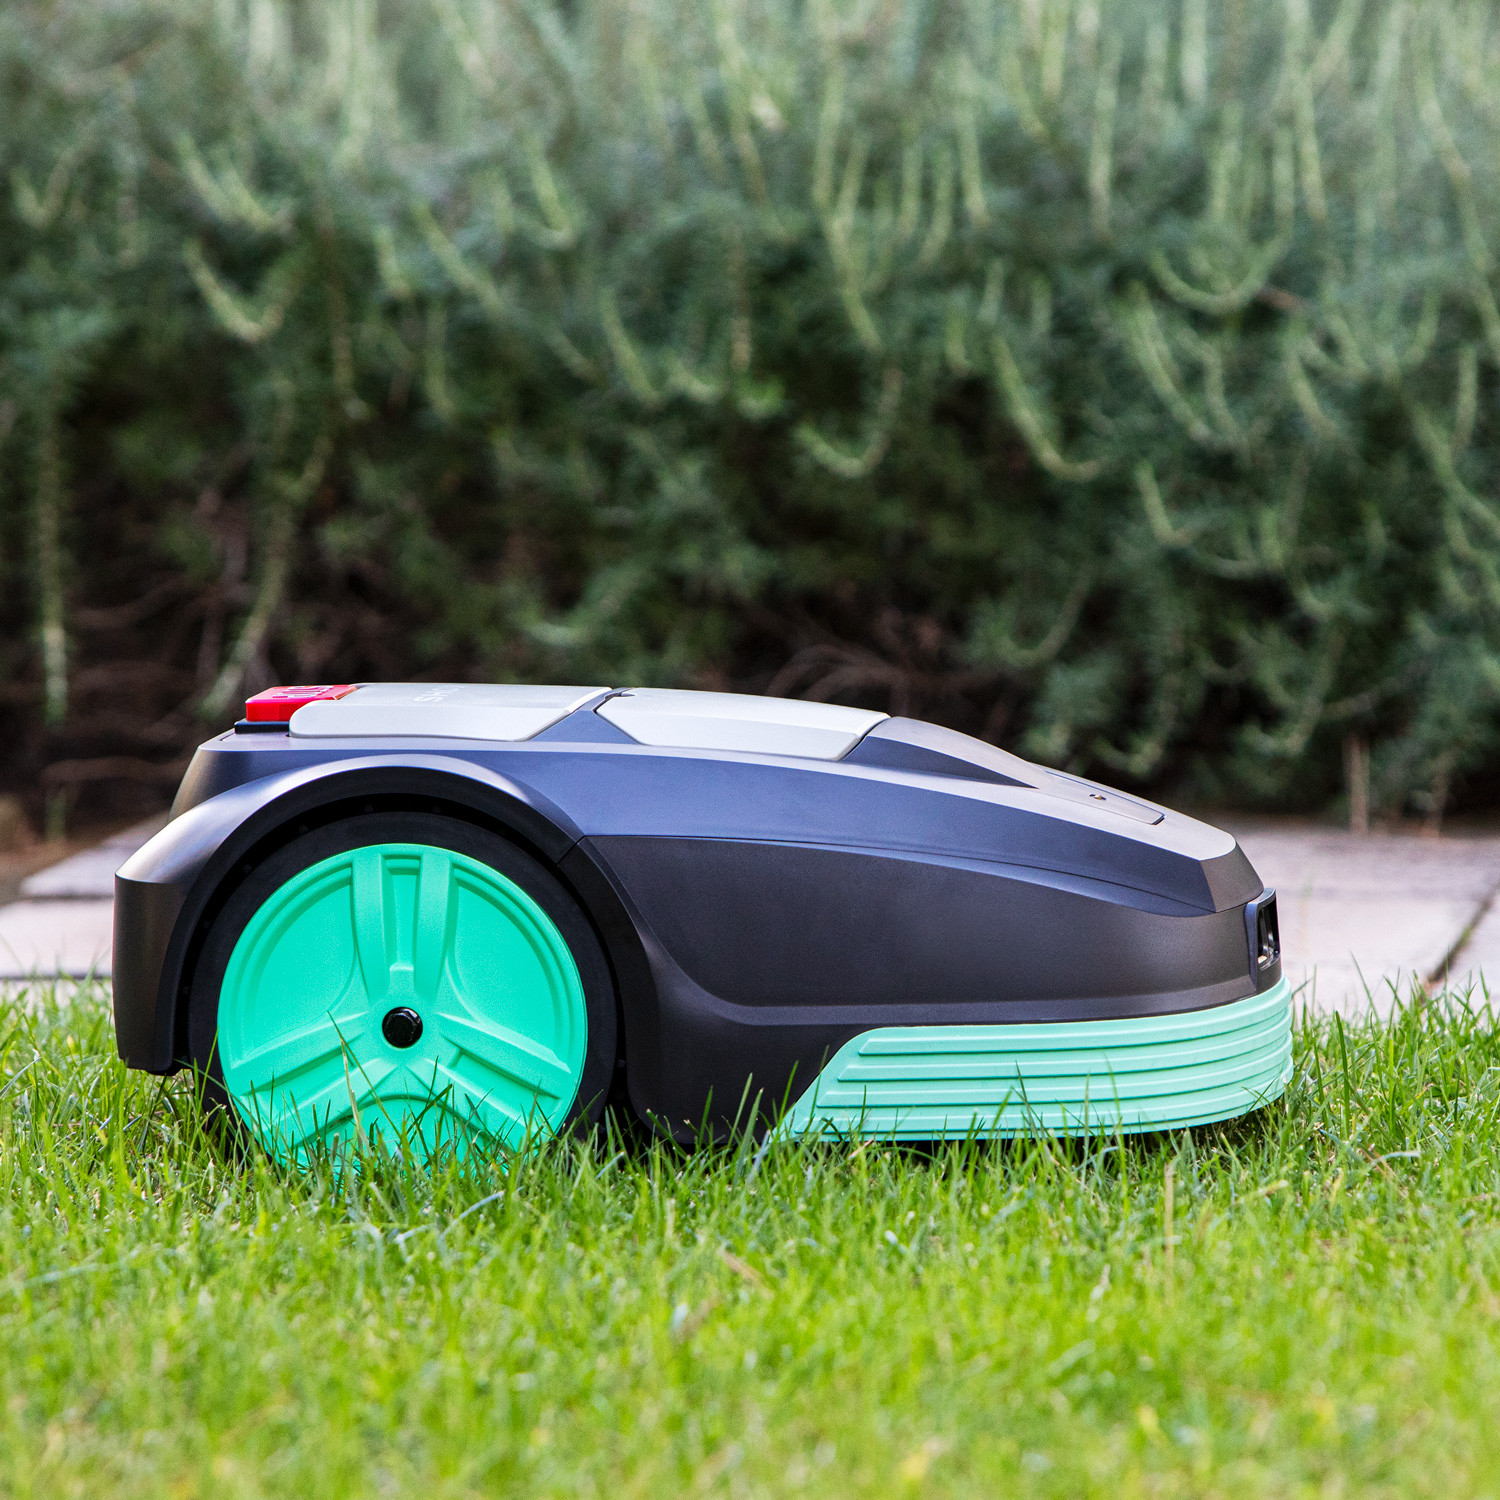 CUTBOT - Automatic Lawnmower Robot - Create Ikohs